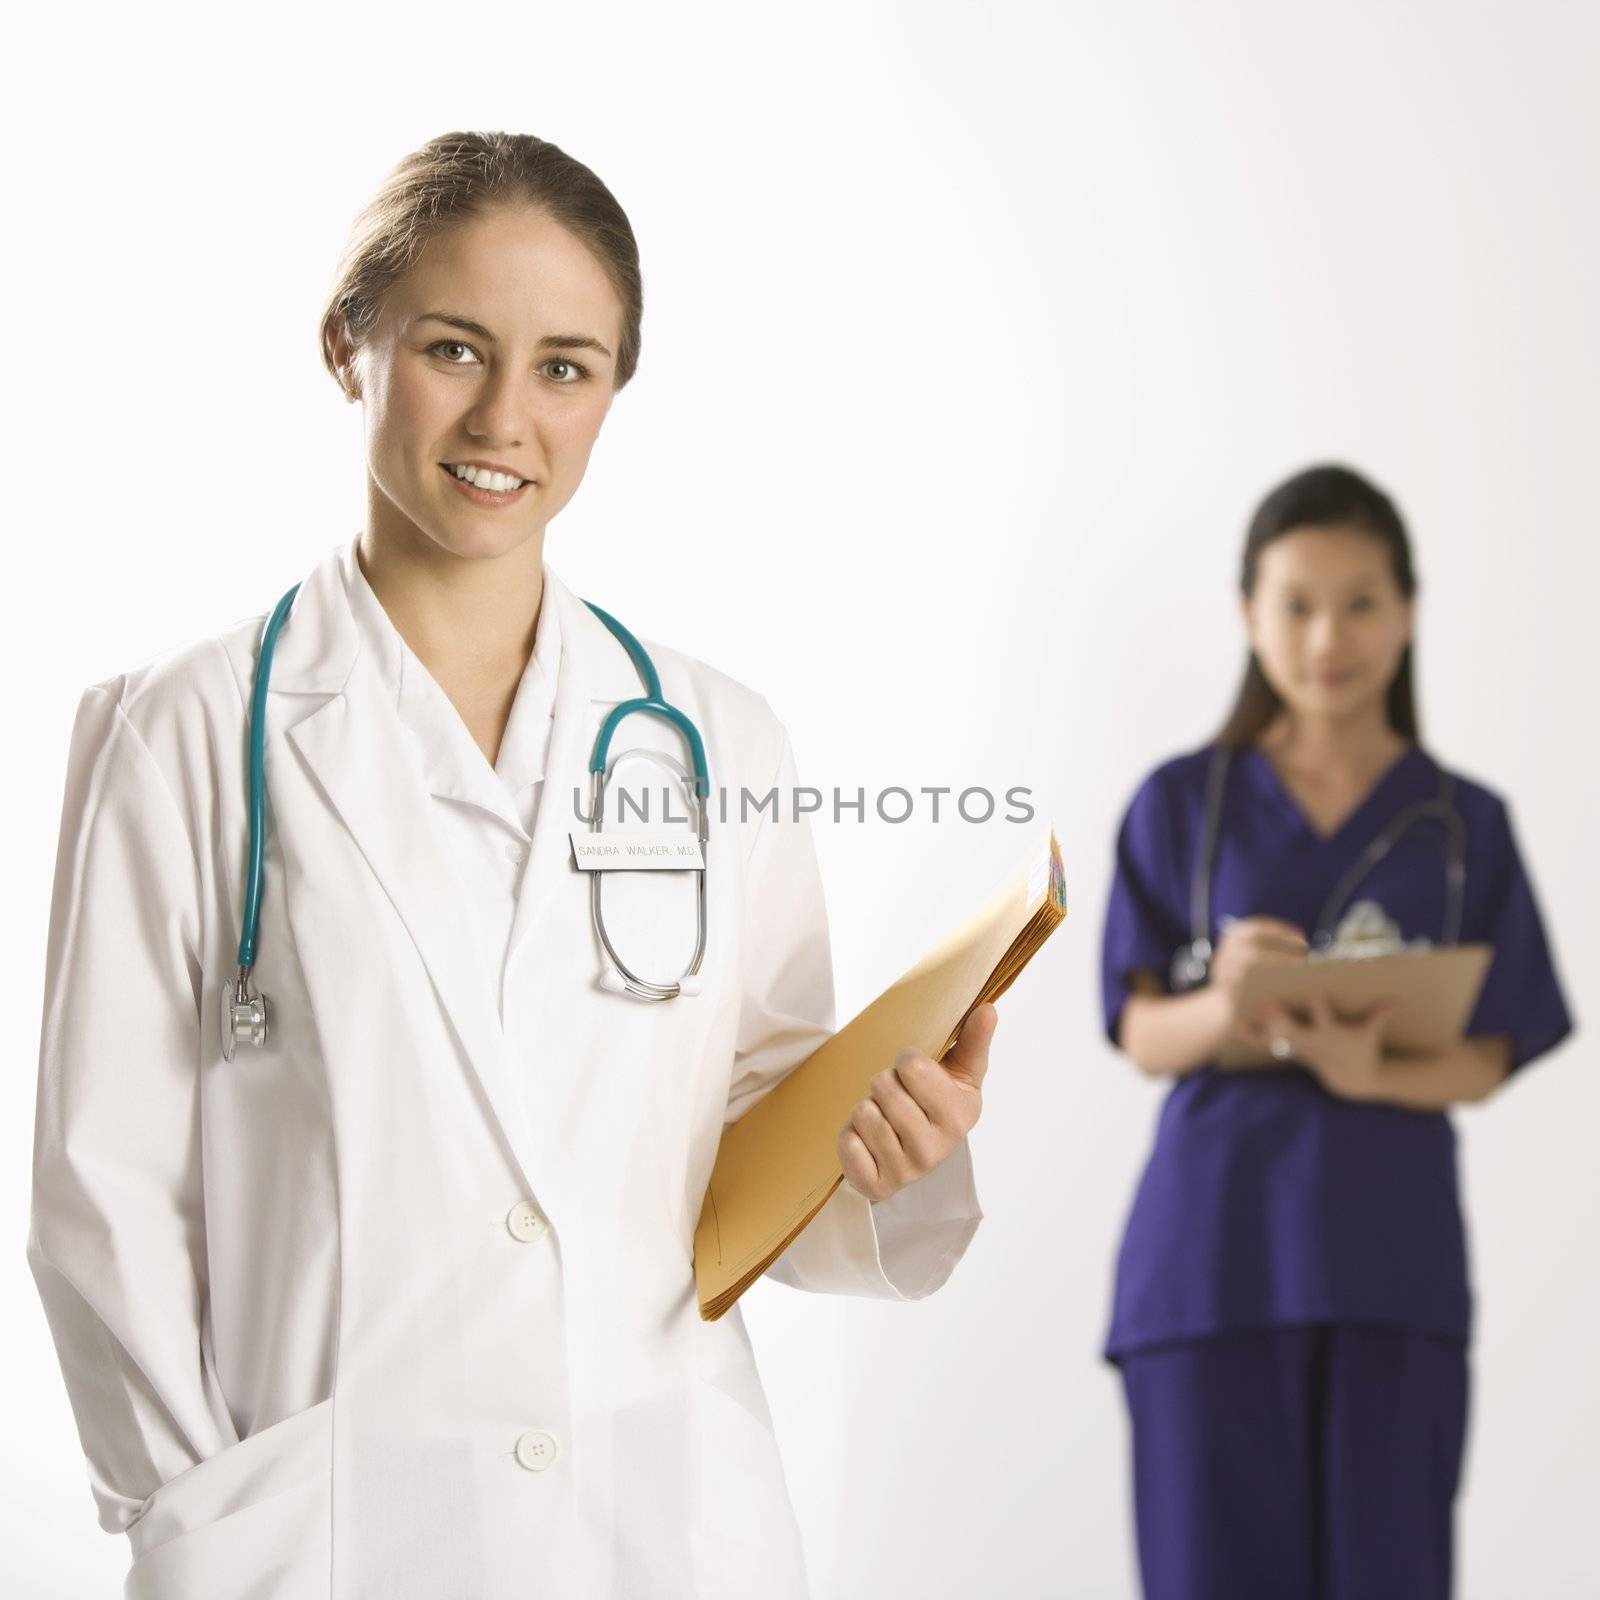 Caucasian mid-adult female doctor smiling and looking at viewer with Asian Chinese mid-adult female physician's assistant standing in background.